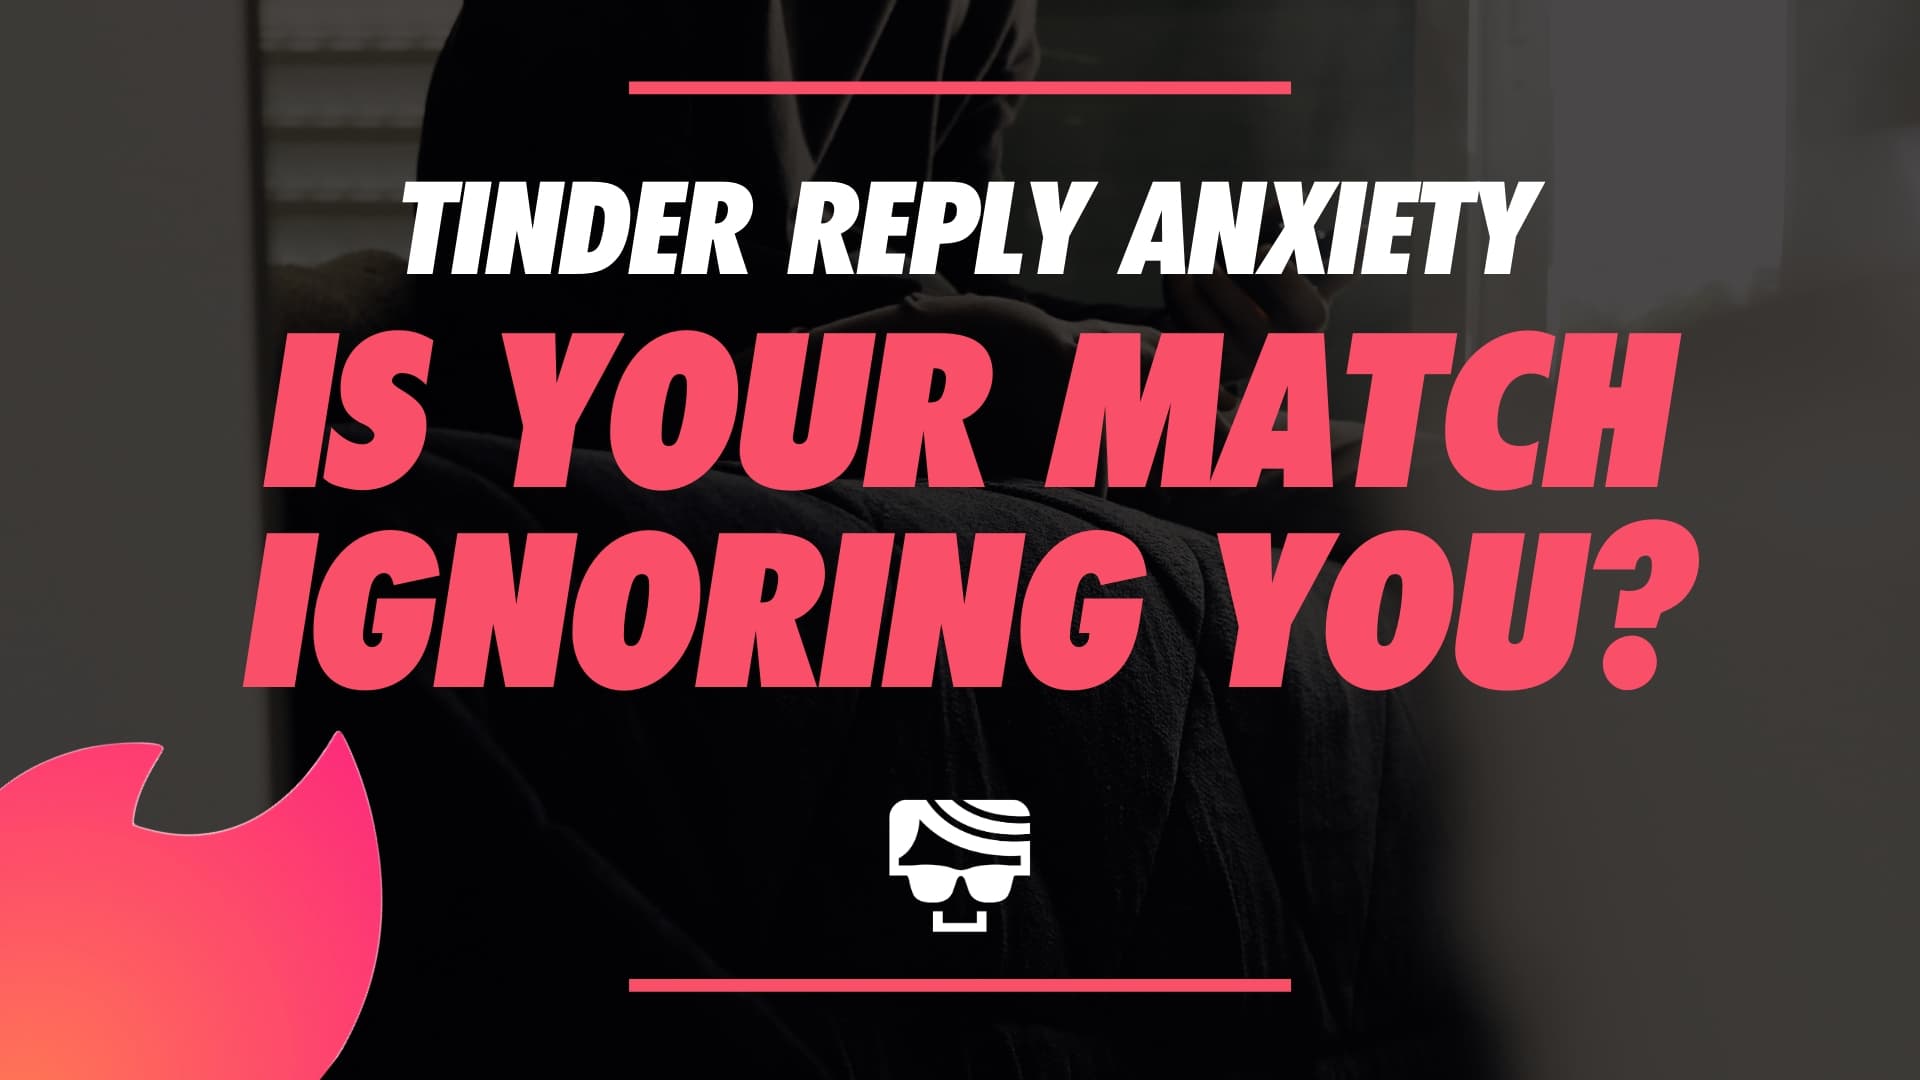 Tinder Reply Anxiety | Is Your Match Ignoring Your Text?